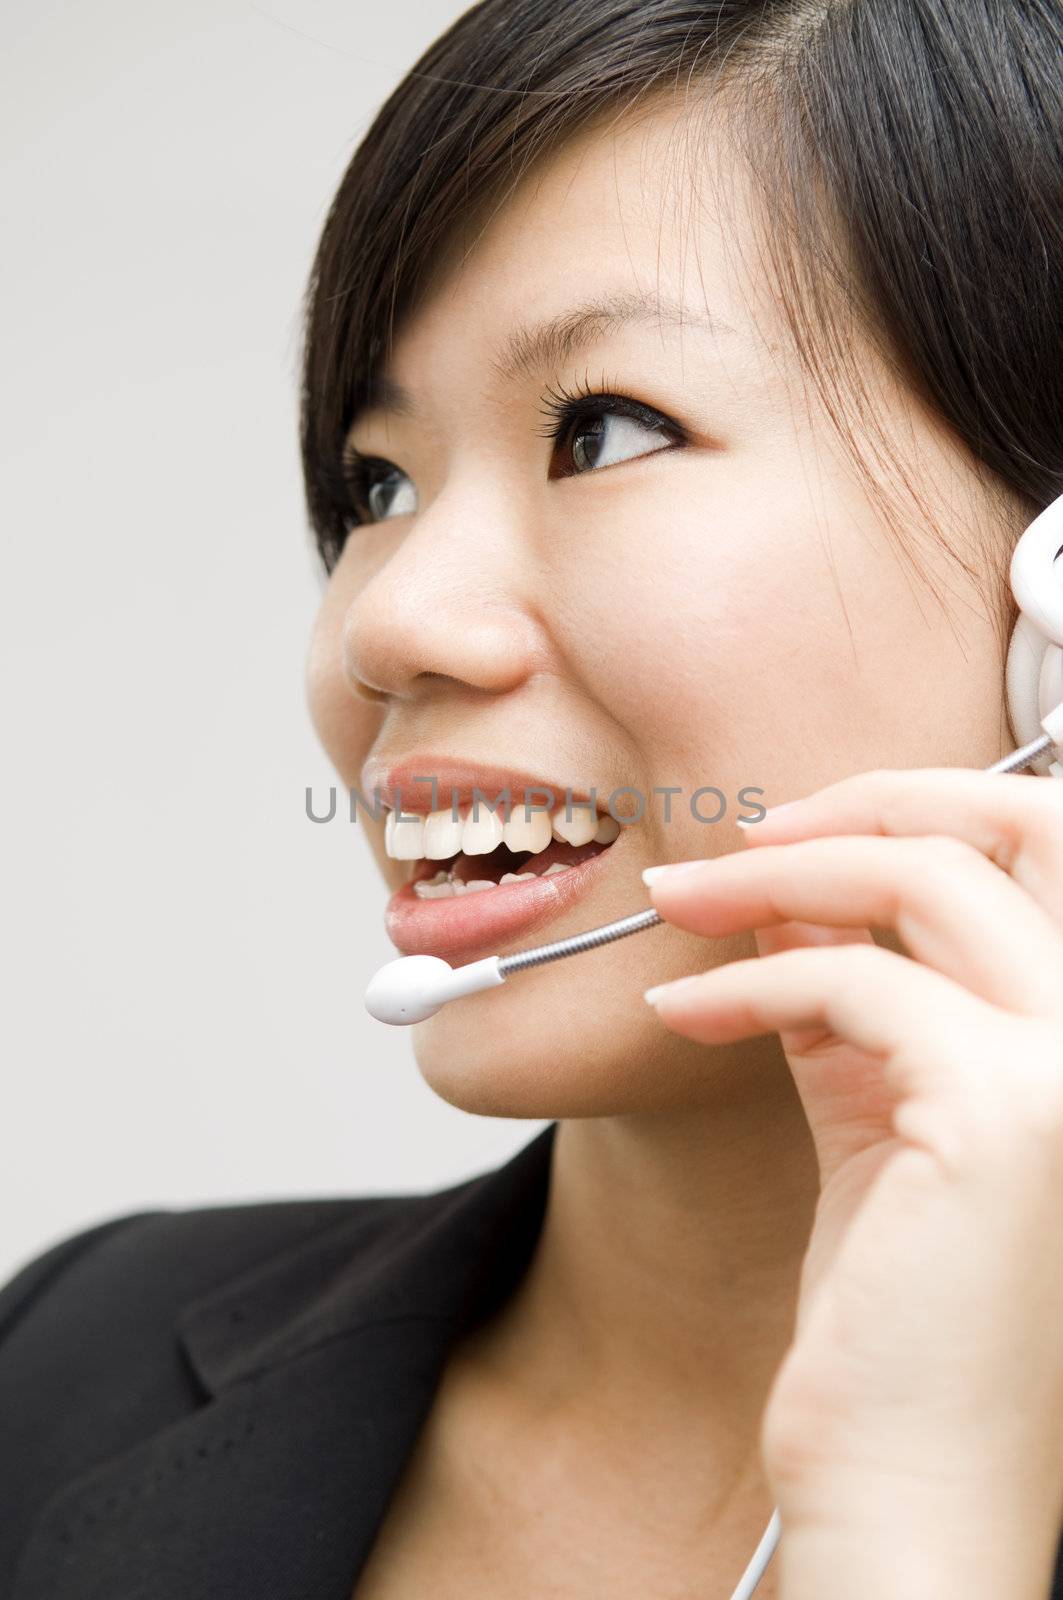 Friendly Customer Representative with headset smiling during a telephone conversation.